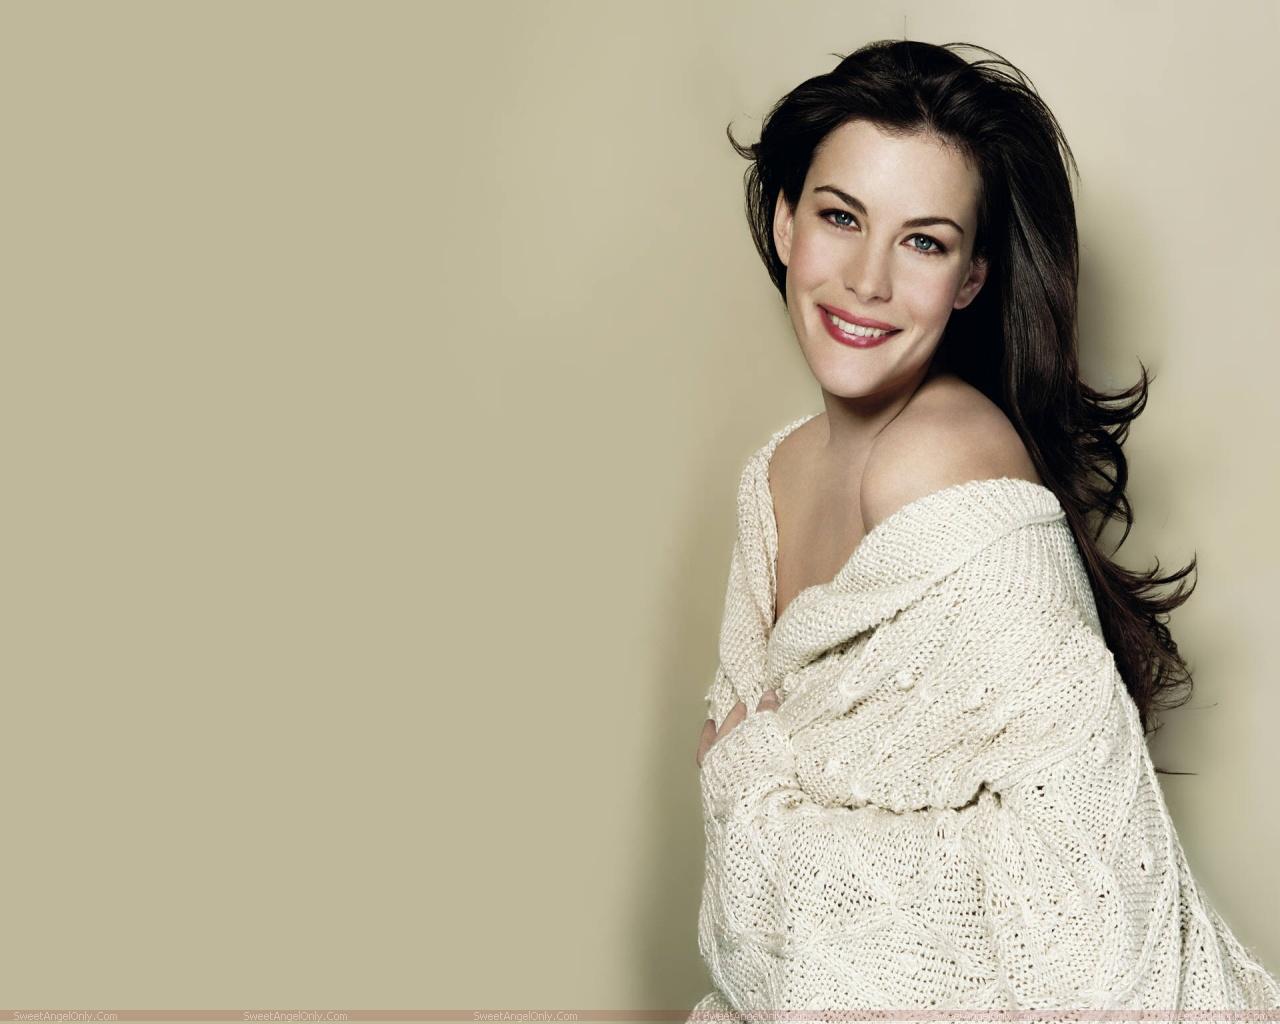 Liv Tyler Profile And Beautiful Latest Hot Wallpaper | Hollywood Stars Hd Wallpapers1280 x 1024